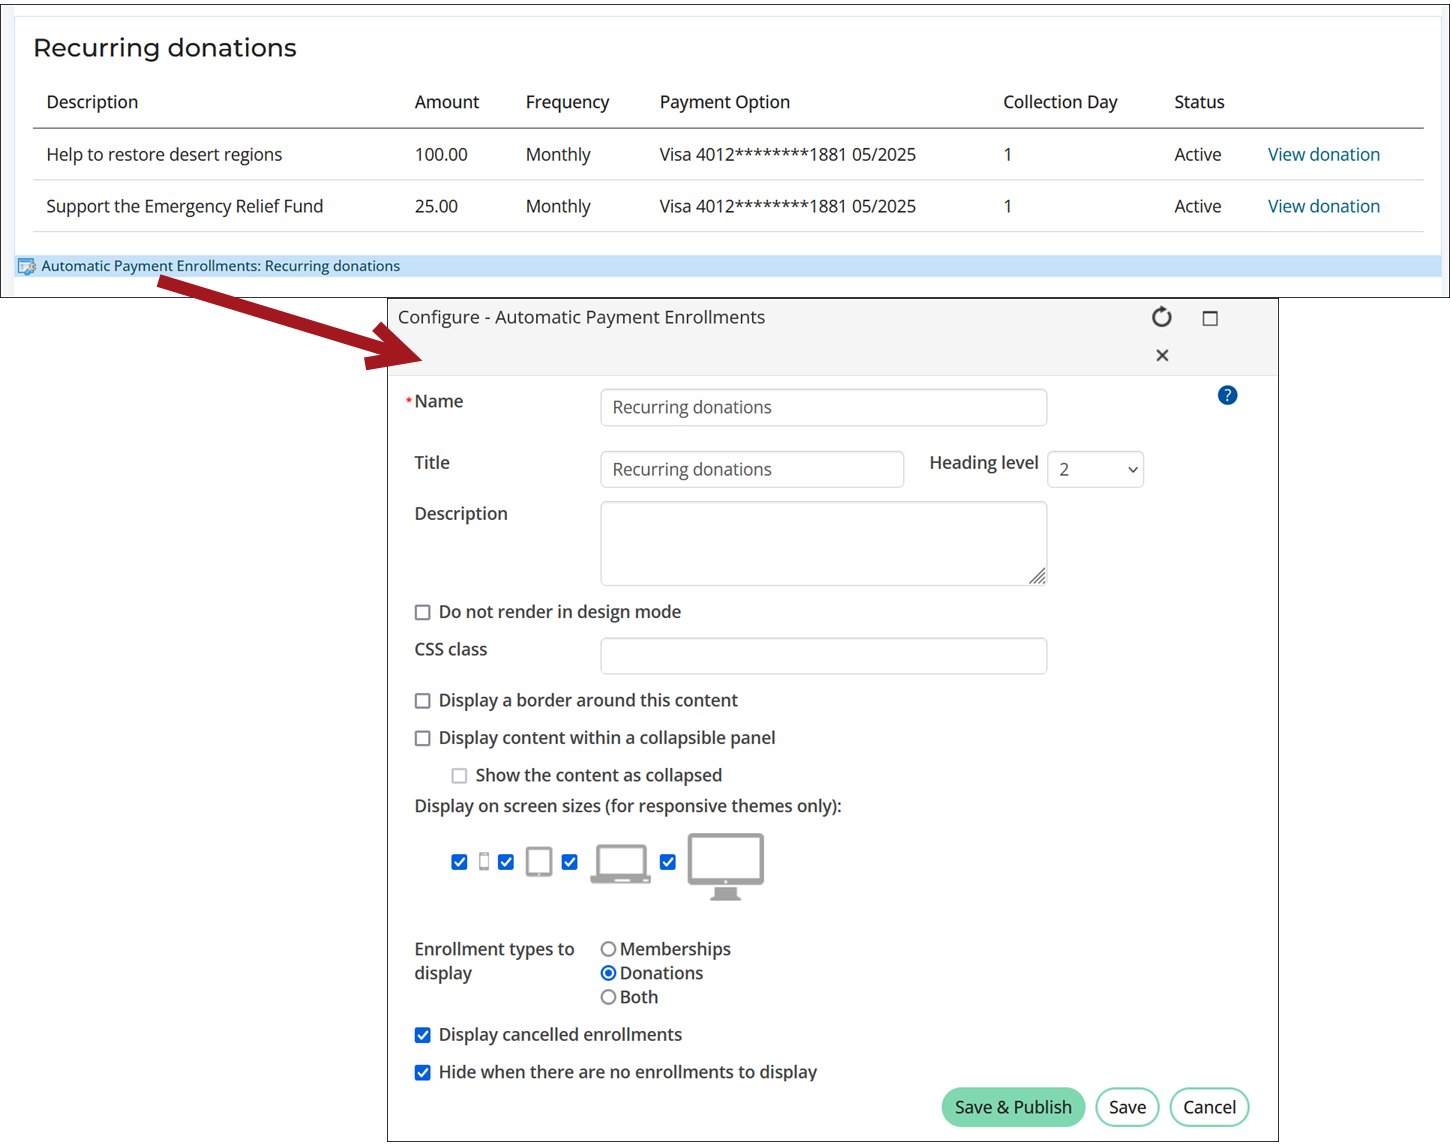 Configuring the Automatic Payment Enrollments content item